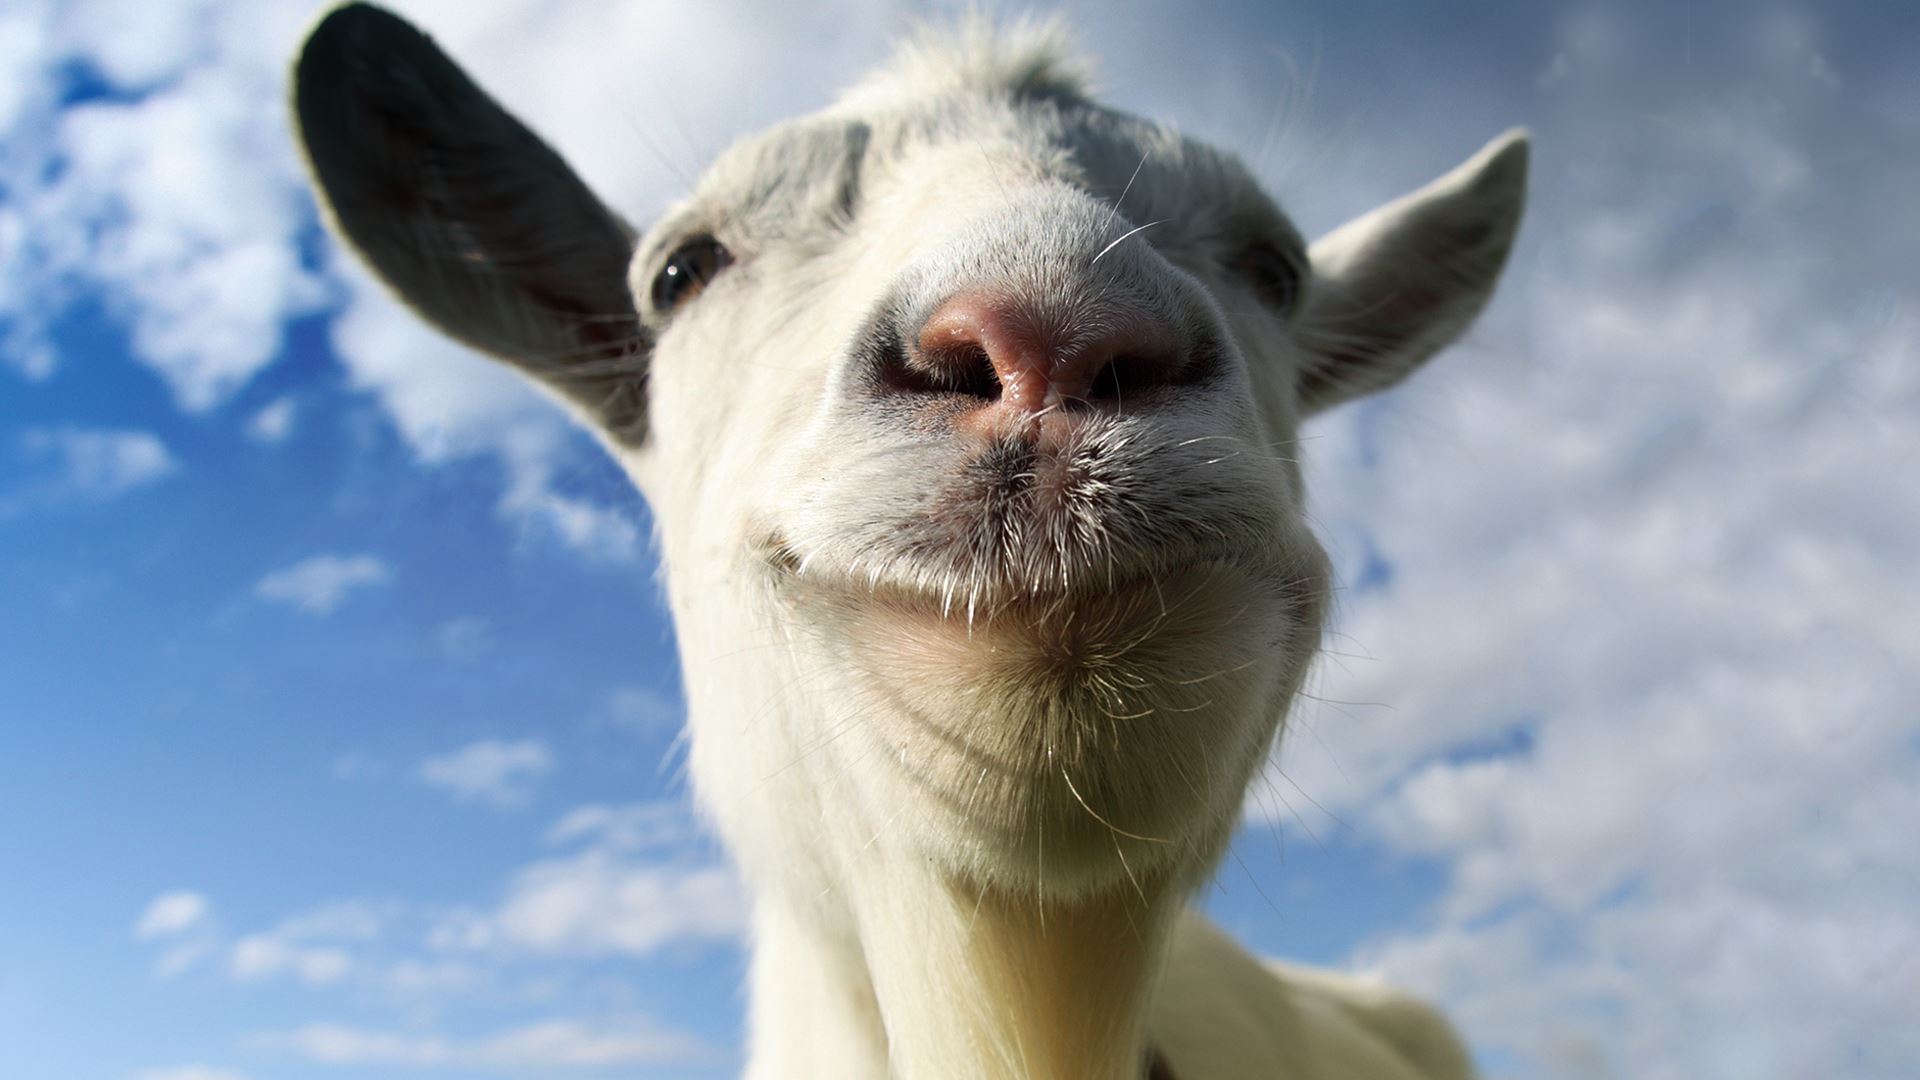 A goat stares directly into the camera on a sunny day.